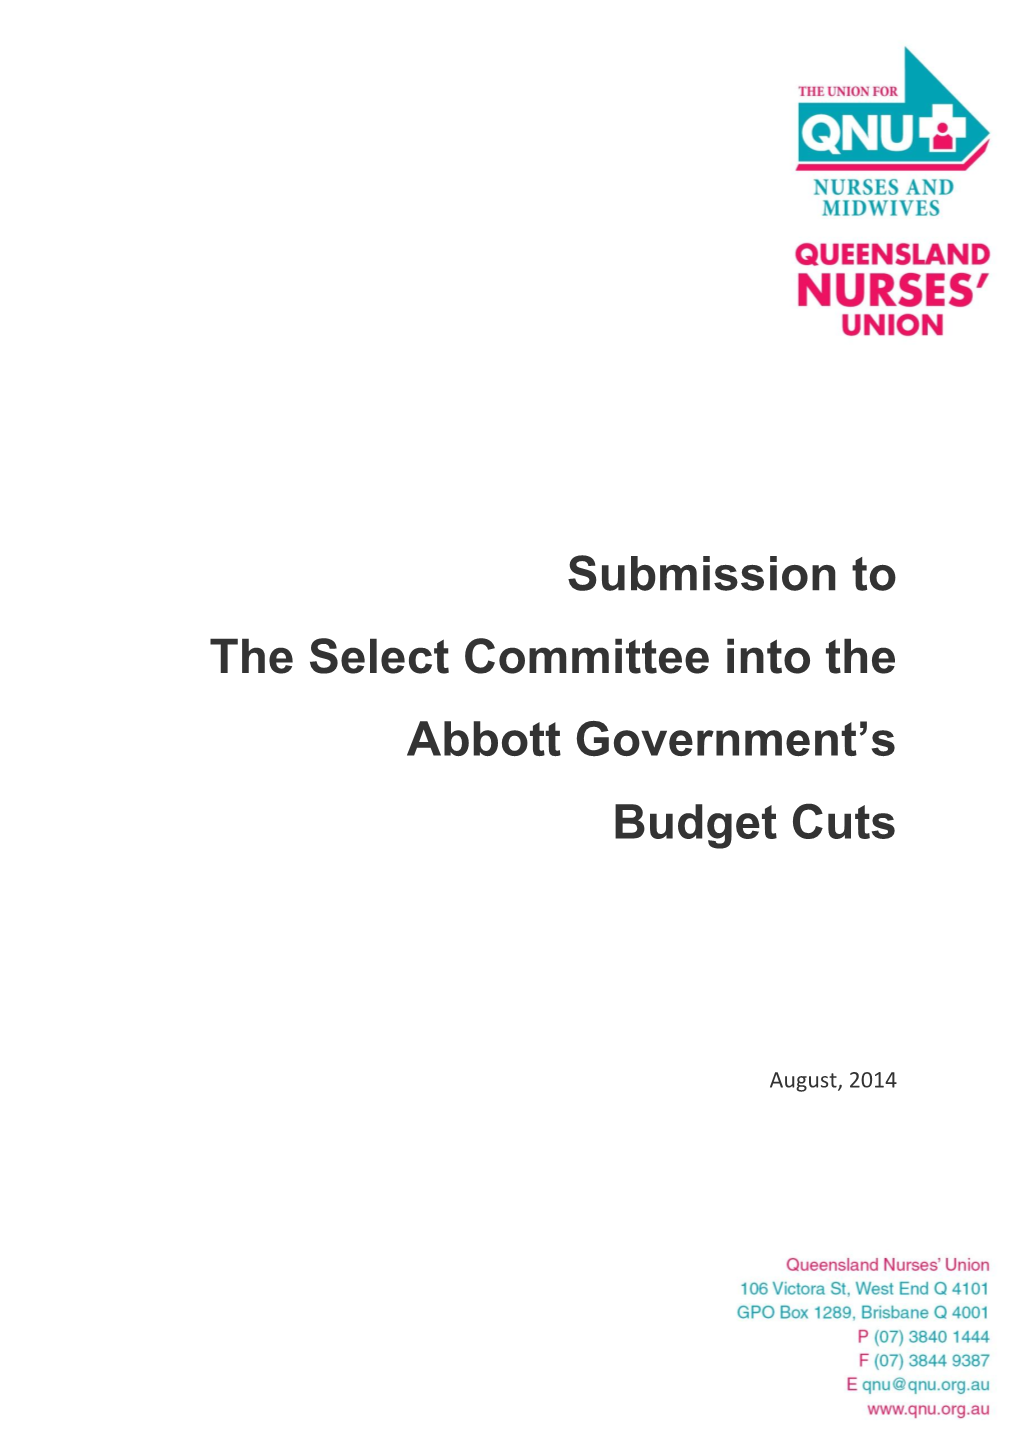 Submission to the Select Committee Into the Abbott Government's